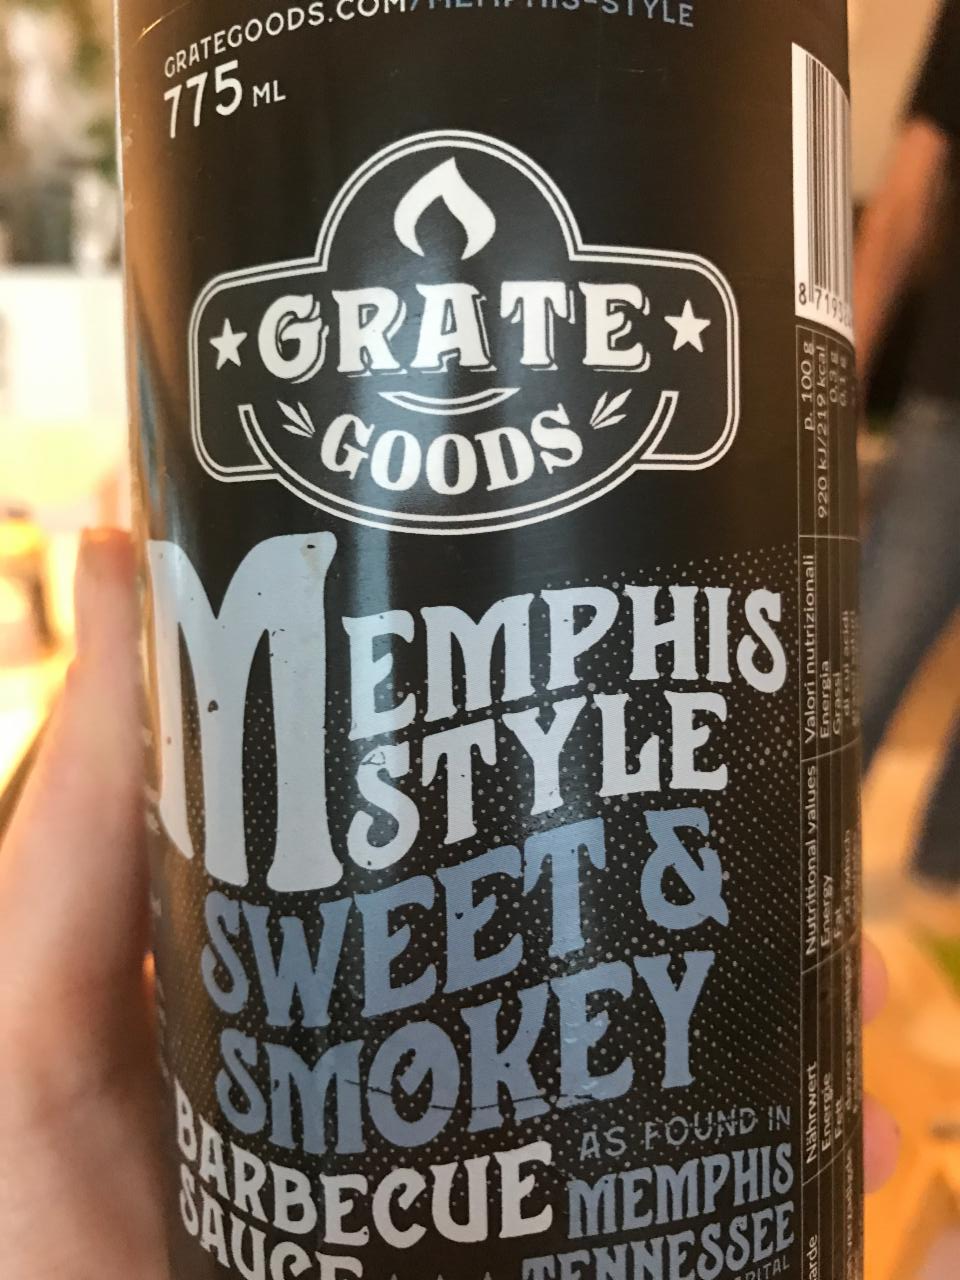 Fotografie - Memphis Style Sweet & Smokey Barbecue Sauce Grate Goods